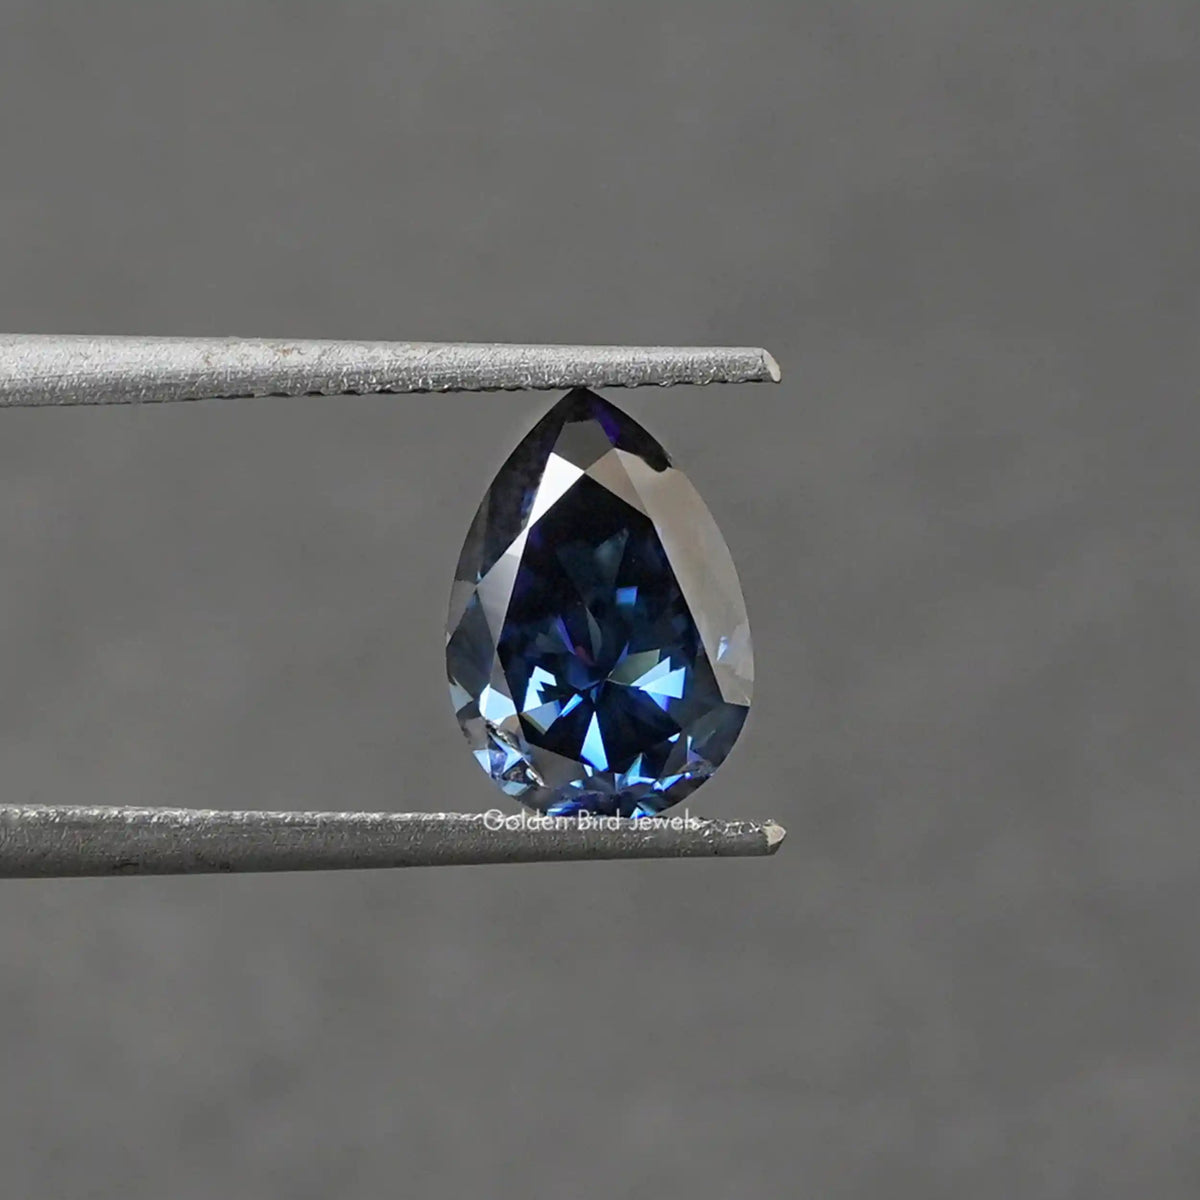 [Front view of 2 carat pear cut loose moissanite]-[Golden Bird Jewels]